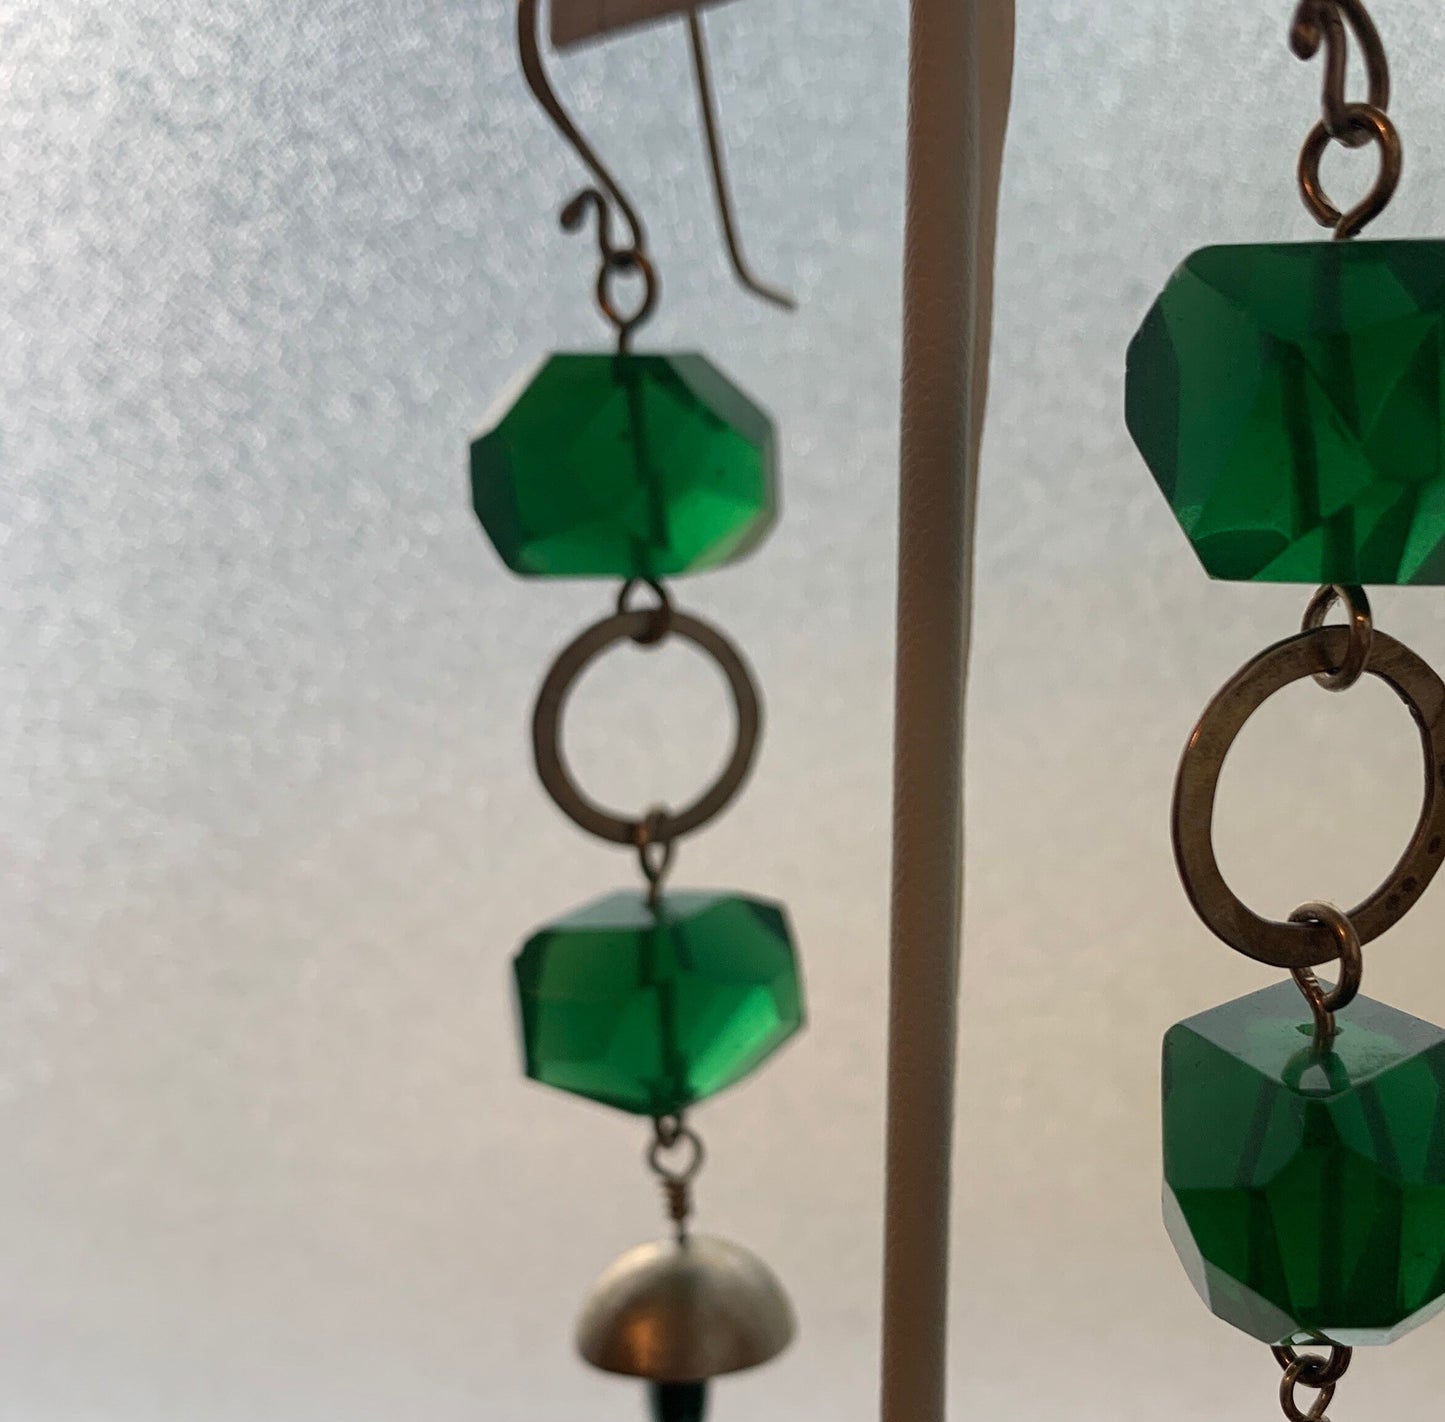 Green glass bead earrings - dangle earrings with malachite and sterling -statement earrings for women - handmade original design with silver